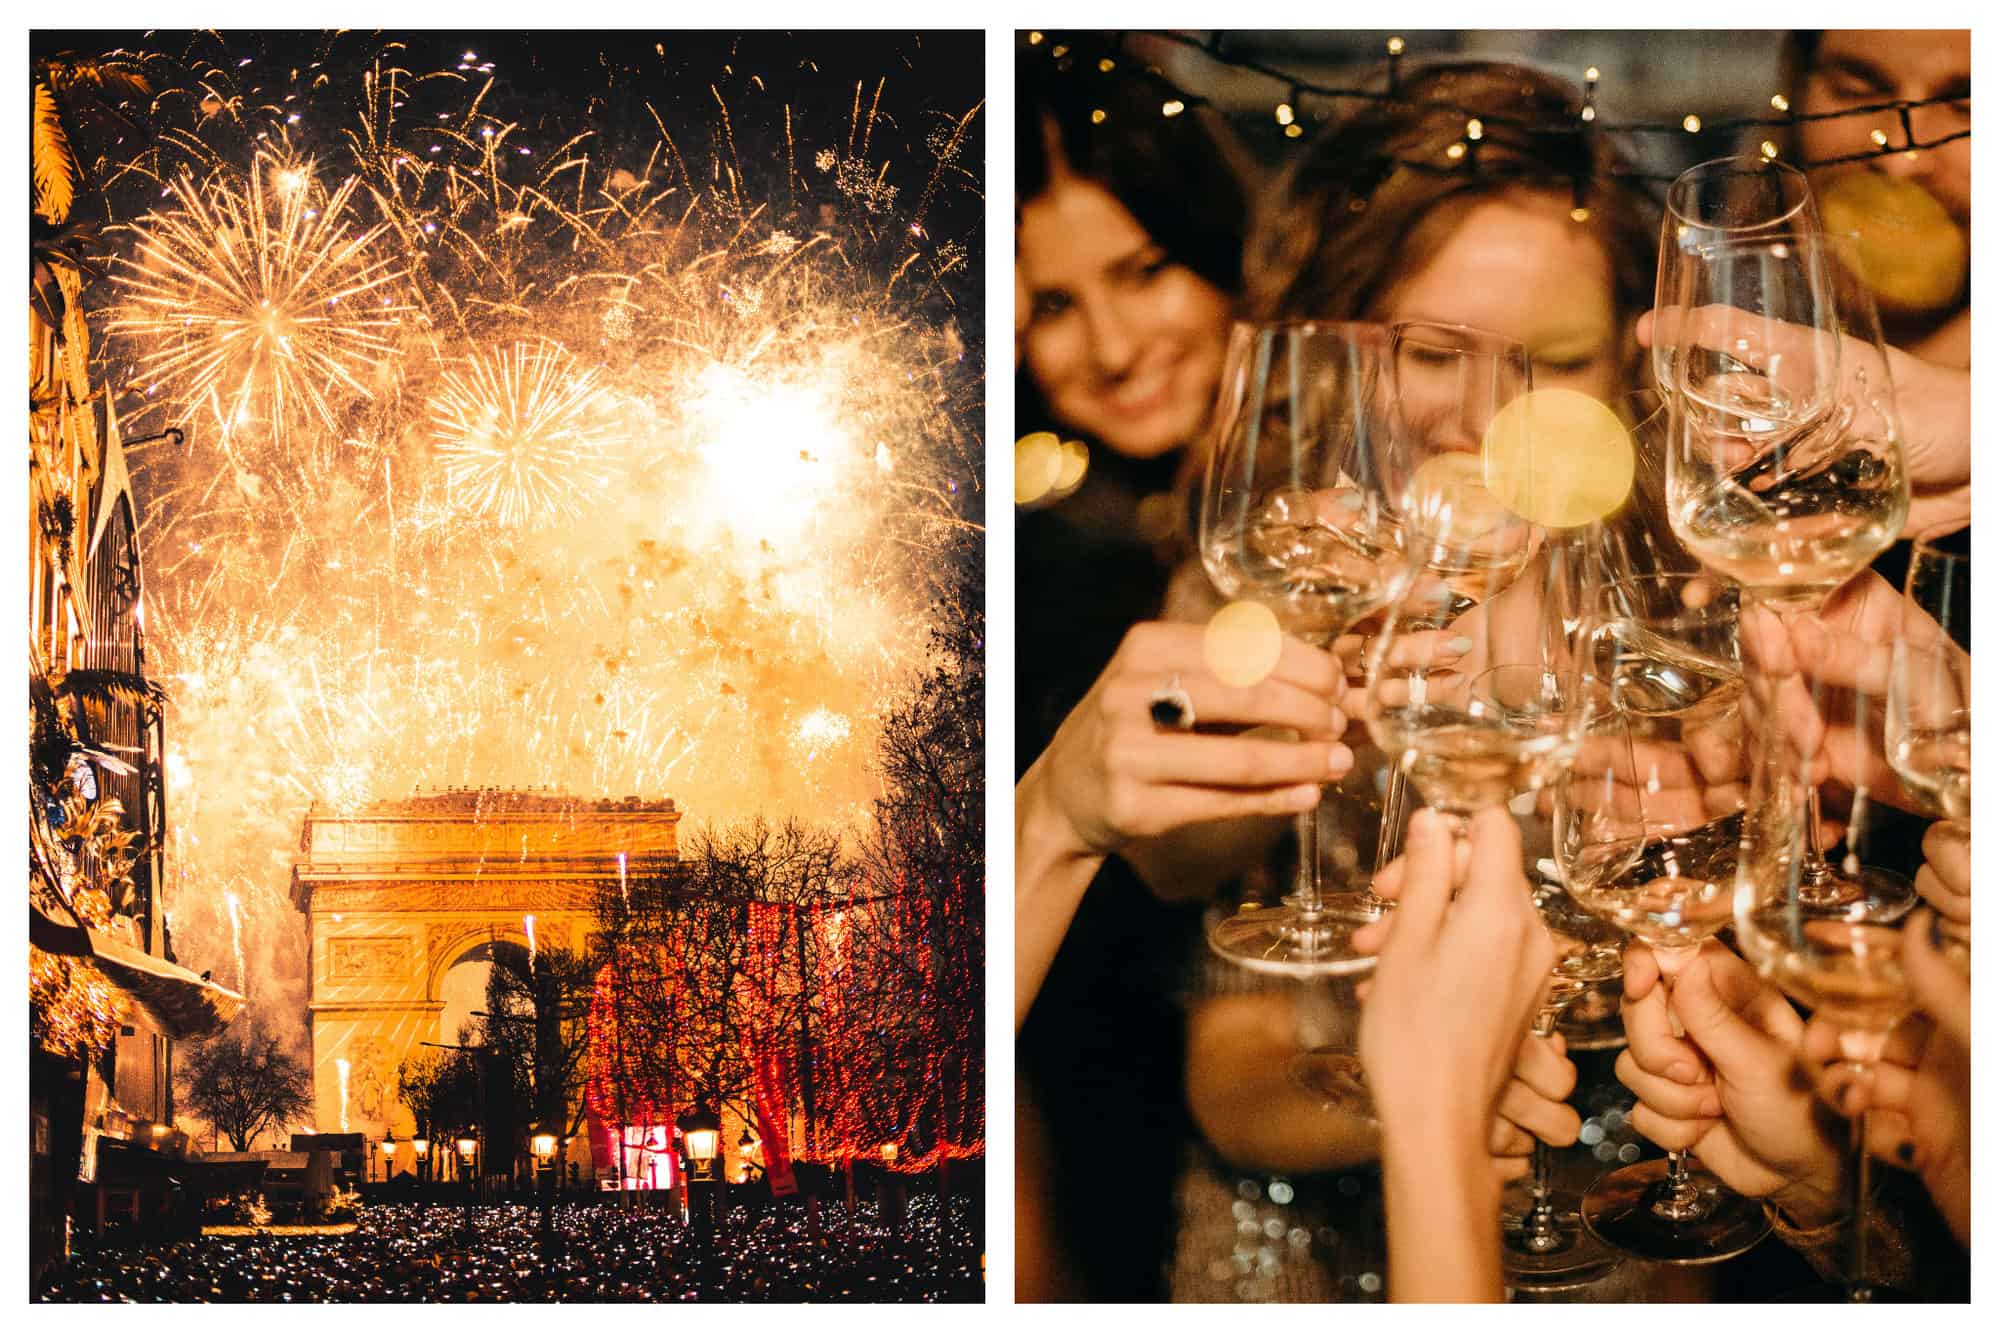 Left: The Arc de Triomphe and its light show on New Year's Eve. Right: Friends are toasting their champagne to celebrate.